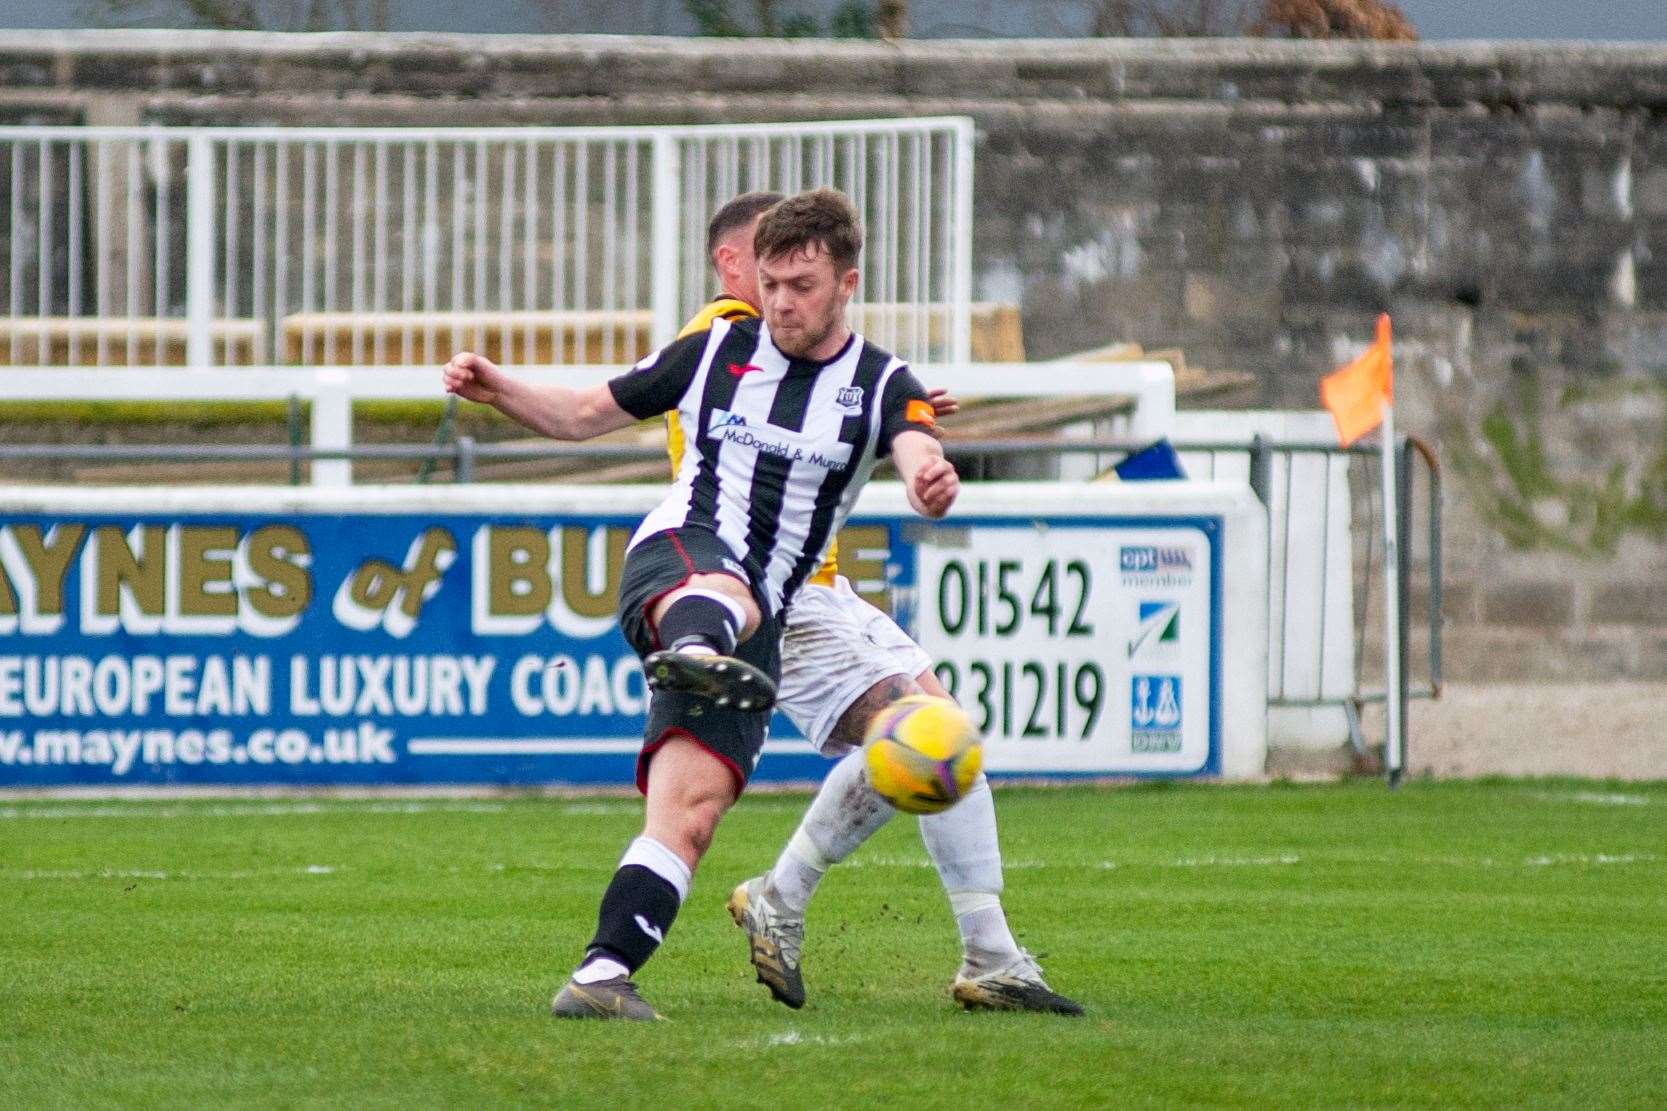 Josh Peters hit four goals for Buckie, making it six goals in four games since his move from Elgin City.